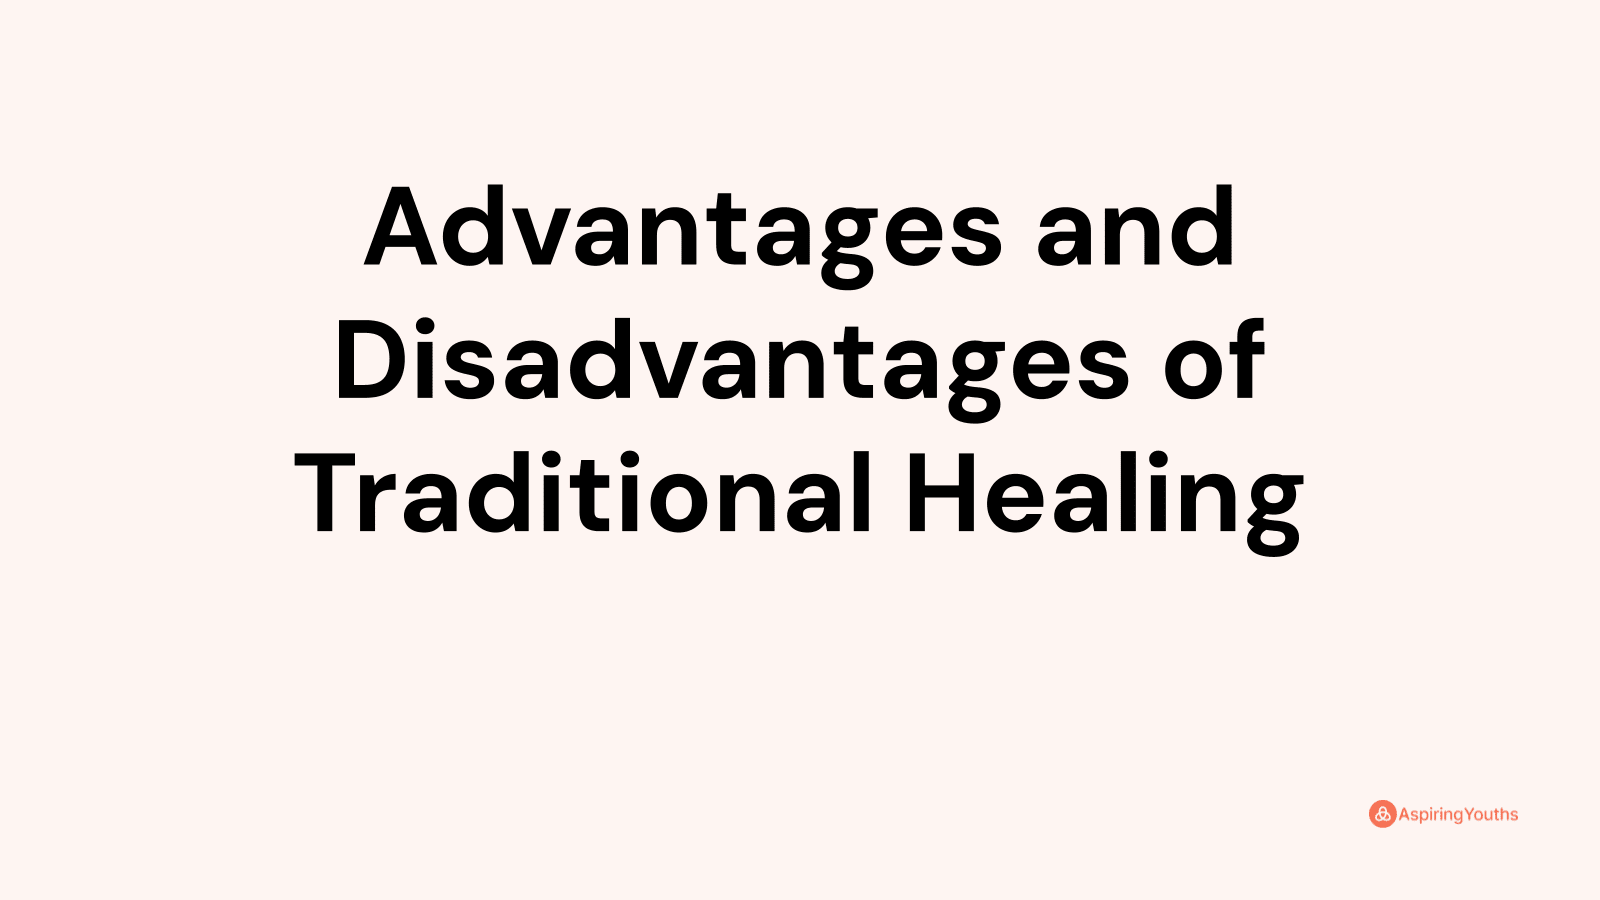 Advantages and disadvantages of Traditional Healing